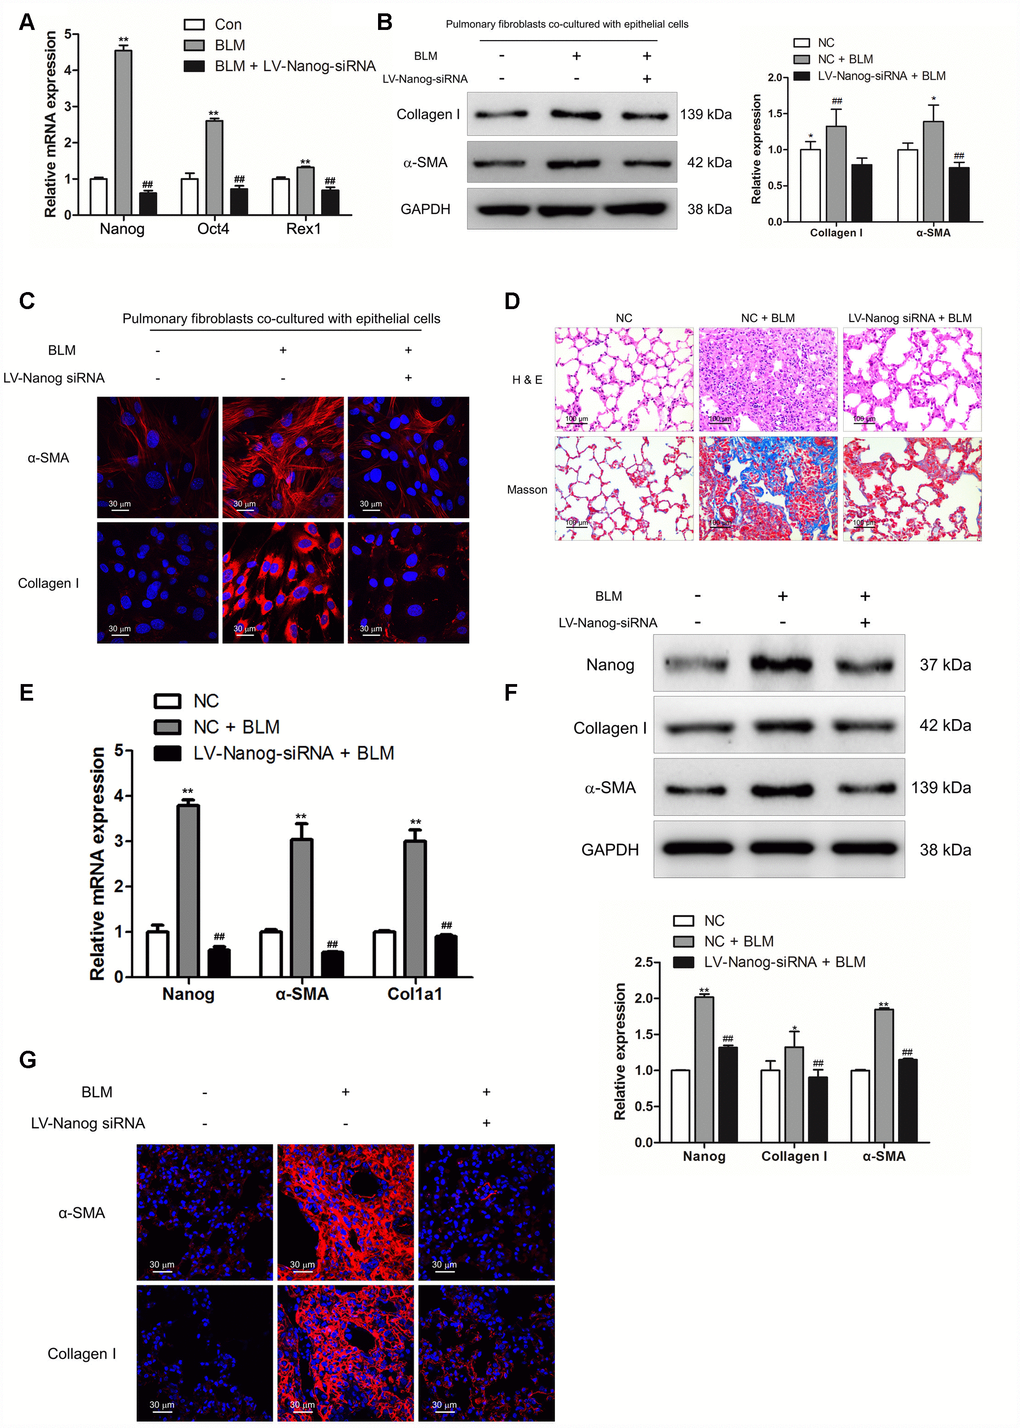 Nanog silencing could suppress pulmonary fibroblast activation and impair the development of pulmonary fibrosis. (A–C) Pulmonary fibroblasts were transfected with LV-Nanog-siRNA and co-cultured with MLE-12 cells as in Figure 3D. (A) The mRNA levels of Nanog, Oct4 and Rex1 were measured by Q-PCR, ** P B) The protein levels of collagen I and α-SMA were determined by Western blot. The expression levels were quantified with ImageJ (n = 3). GAPDH was used as a loading control, *P C) The expression of collagen I and α-SMA were further examined by immunofluorescence staining. (D–G) Mice were intratracheally injected with 5 × 108 TU/ml LV-Nanog-siRNA or negative control (NC) 7 days after administration of BLM. Mice were sacrificed on day 21 after BLM instillation. (D) Pulmonary fibrosis was determined by haematoxylin and eosin (H&E) staining and collagen I was revealed by Sirius Red/Fast Green staining. (E) The mRNA levels of Nanog, α-SMA and collagen I were determined by Q-PCR, ** P F) The protein levels of Nanog, collagen I and α-SMA were measured by Western blot. The expression levels were quantified with ImageJ (n = 3). GAPDH was used as a loading control, *P G) The expression of α-SMA and collagen I were further confirmed by immunofluorescence staining.